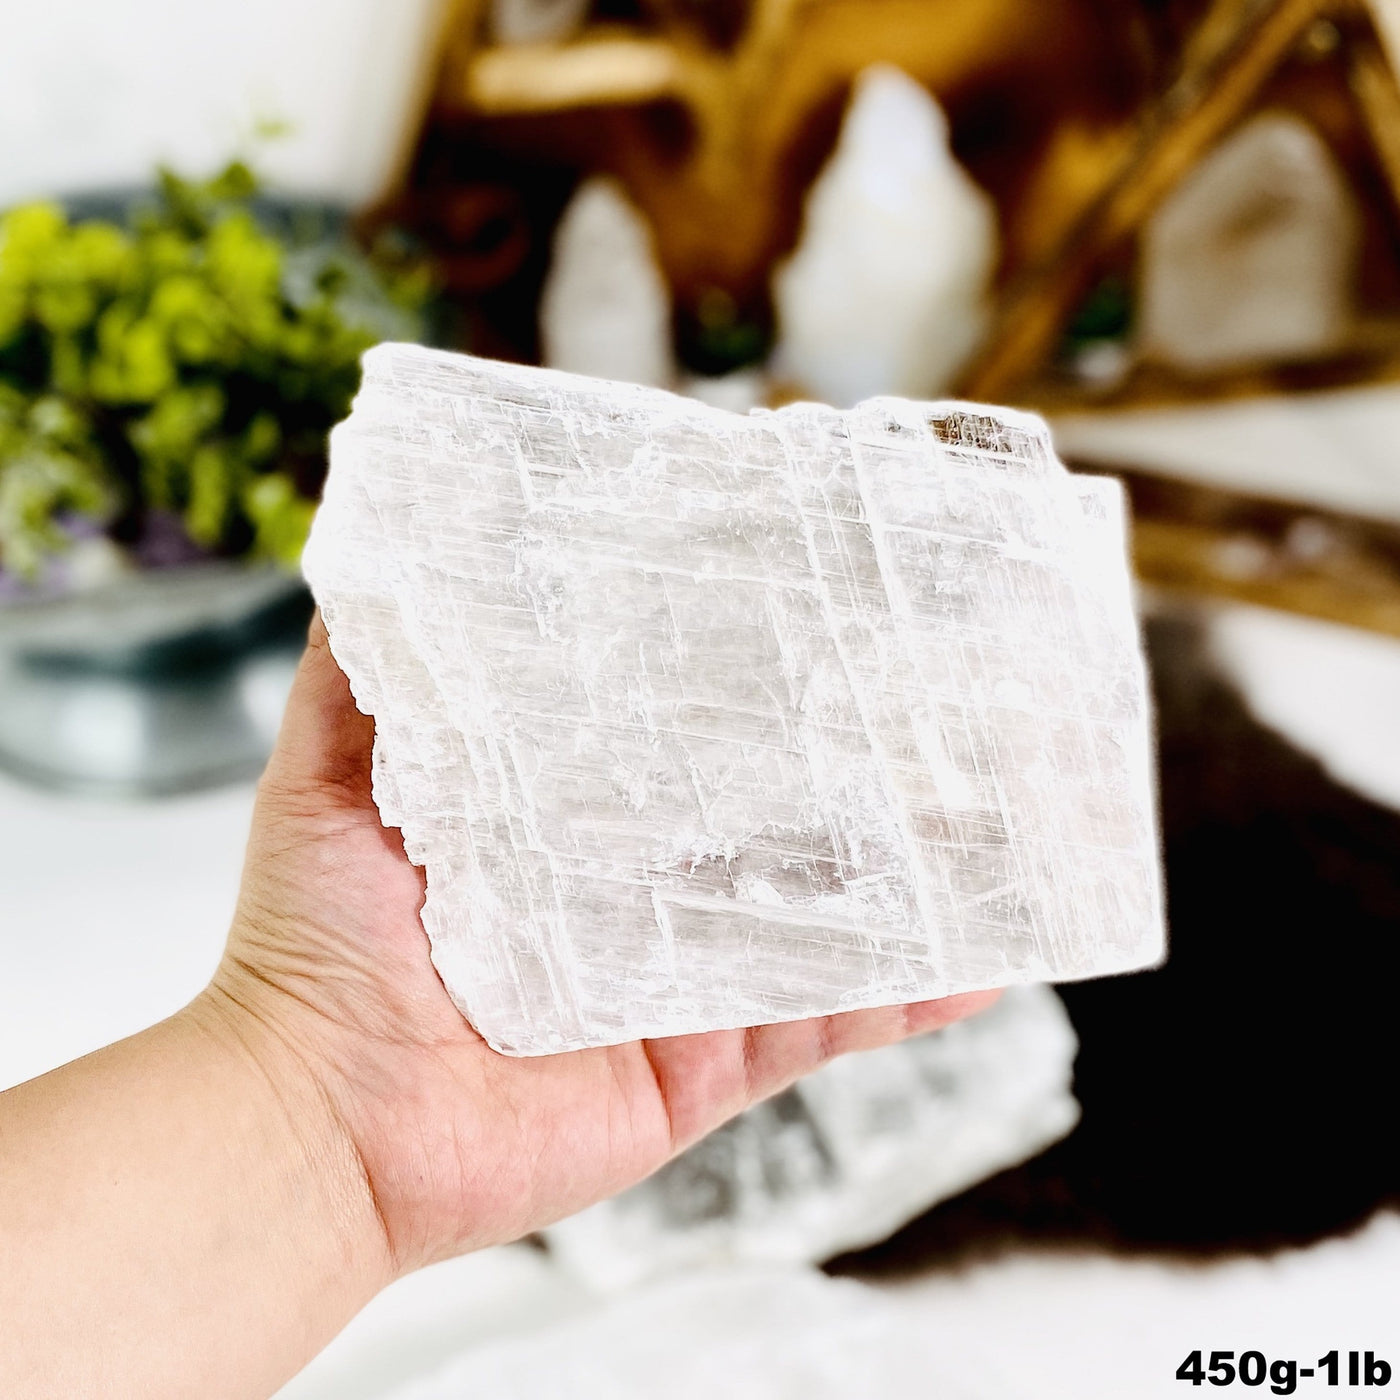 450g-1lb selenite transparent slab in hand for size reference